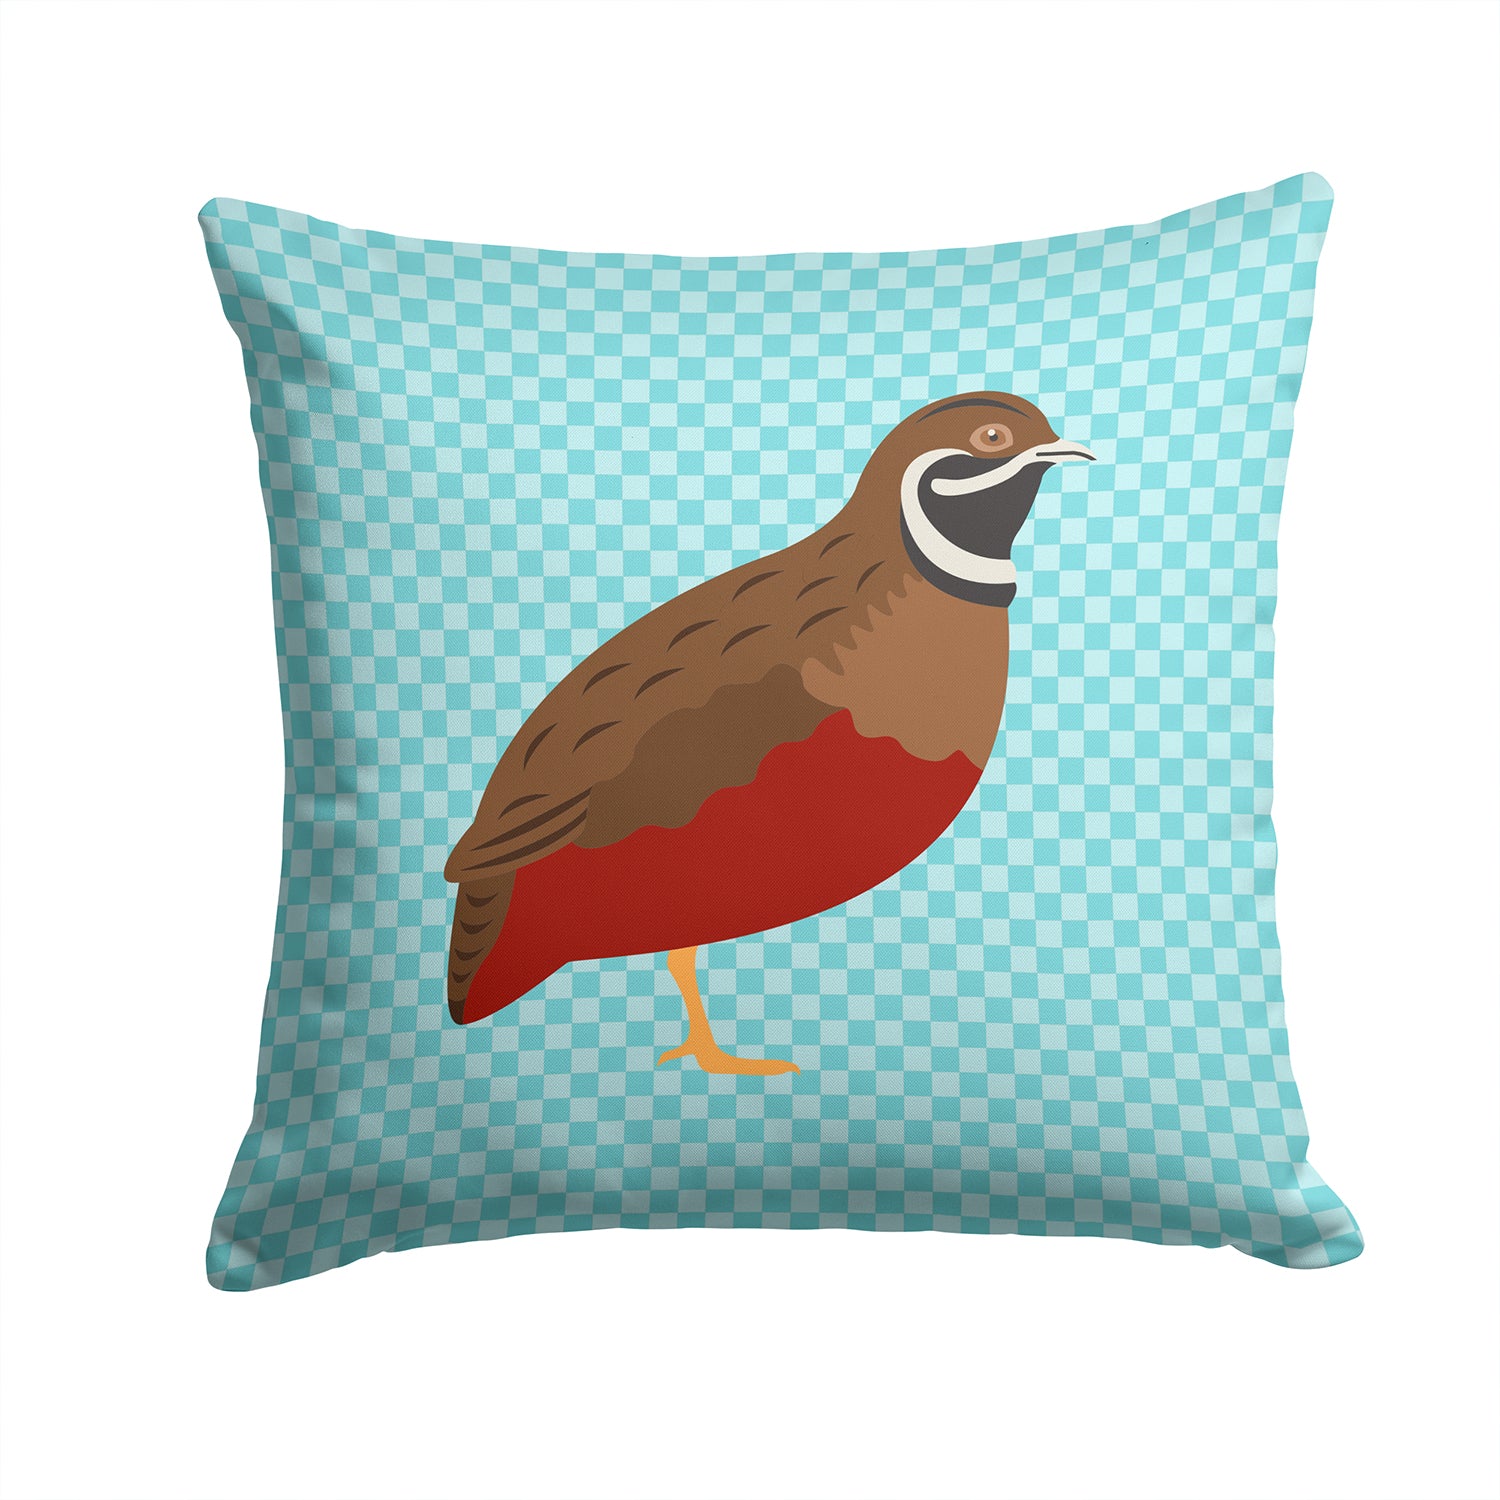 Chinese Painted or King Quail Blue Check Fabric Decorative Pillow BB8130PW1414 - the-store.com